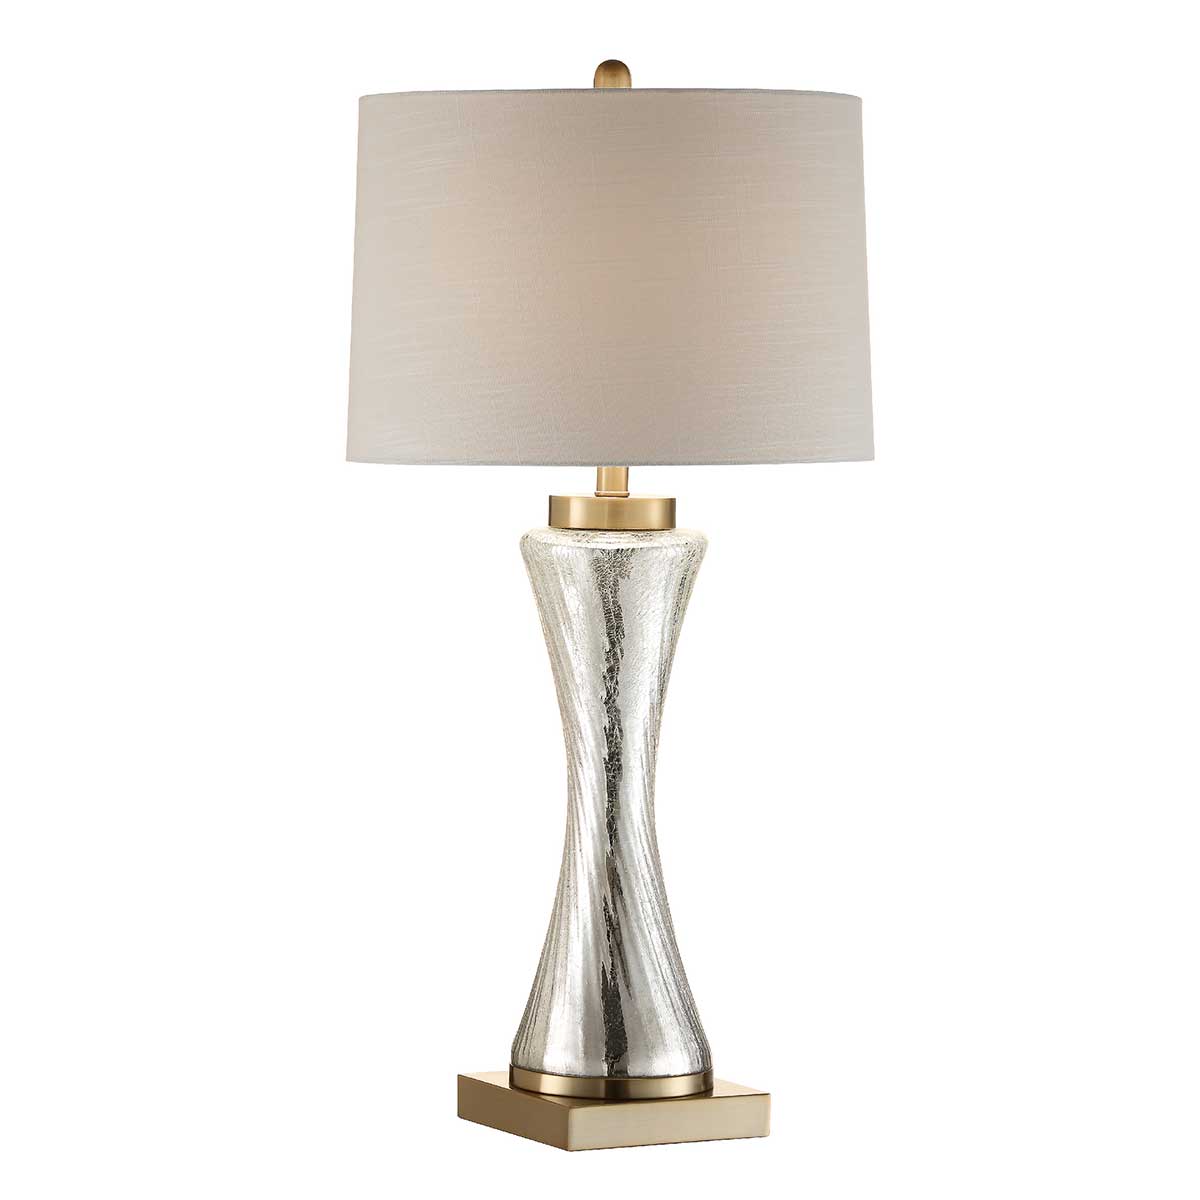 Crestview Collection Addison Twist Table Lamp